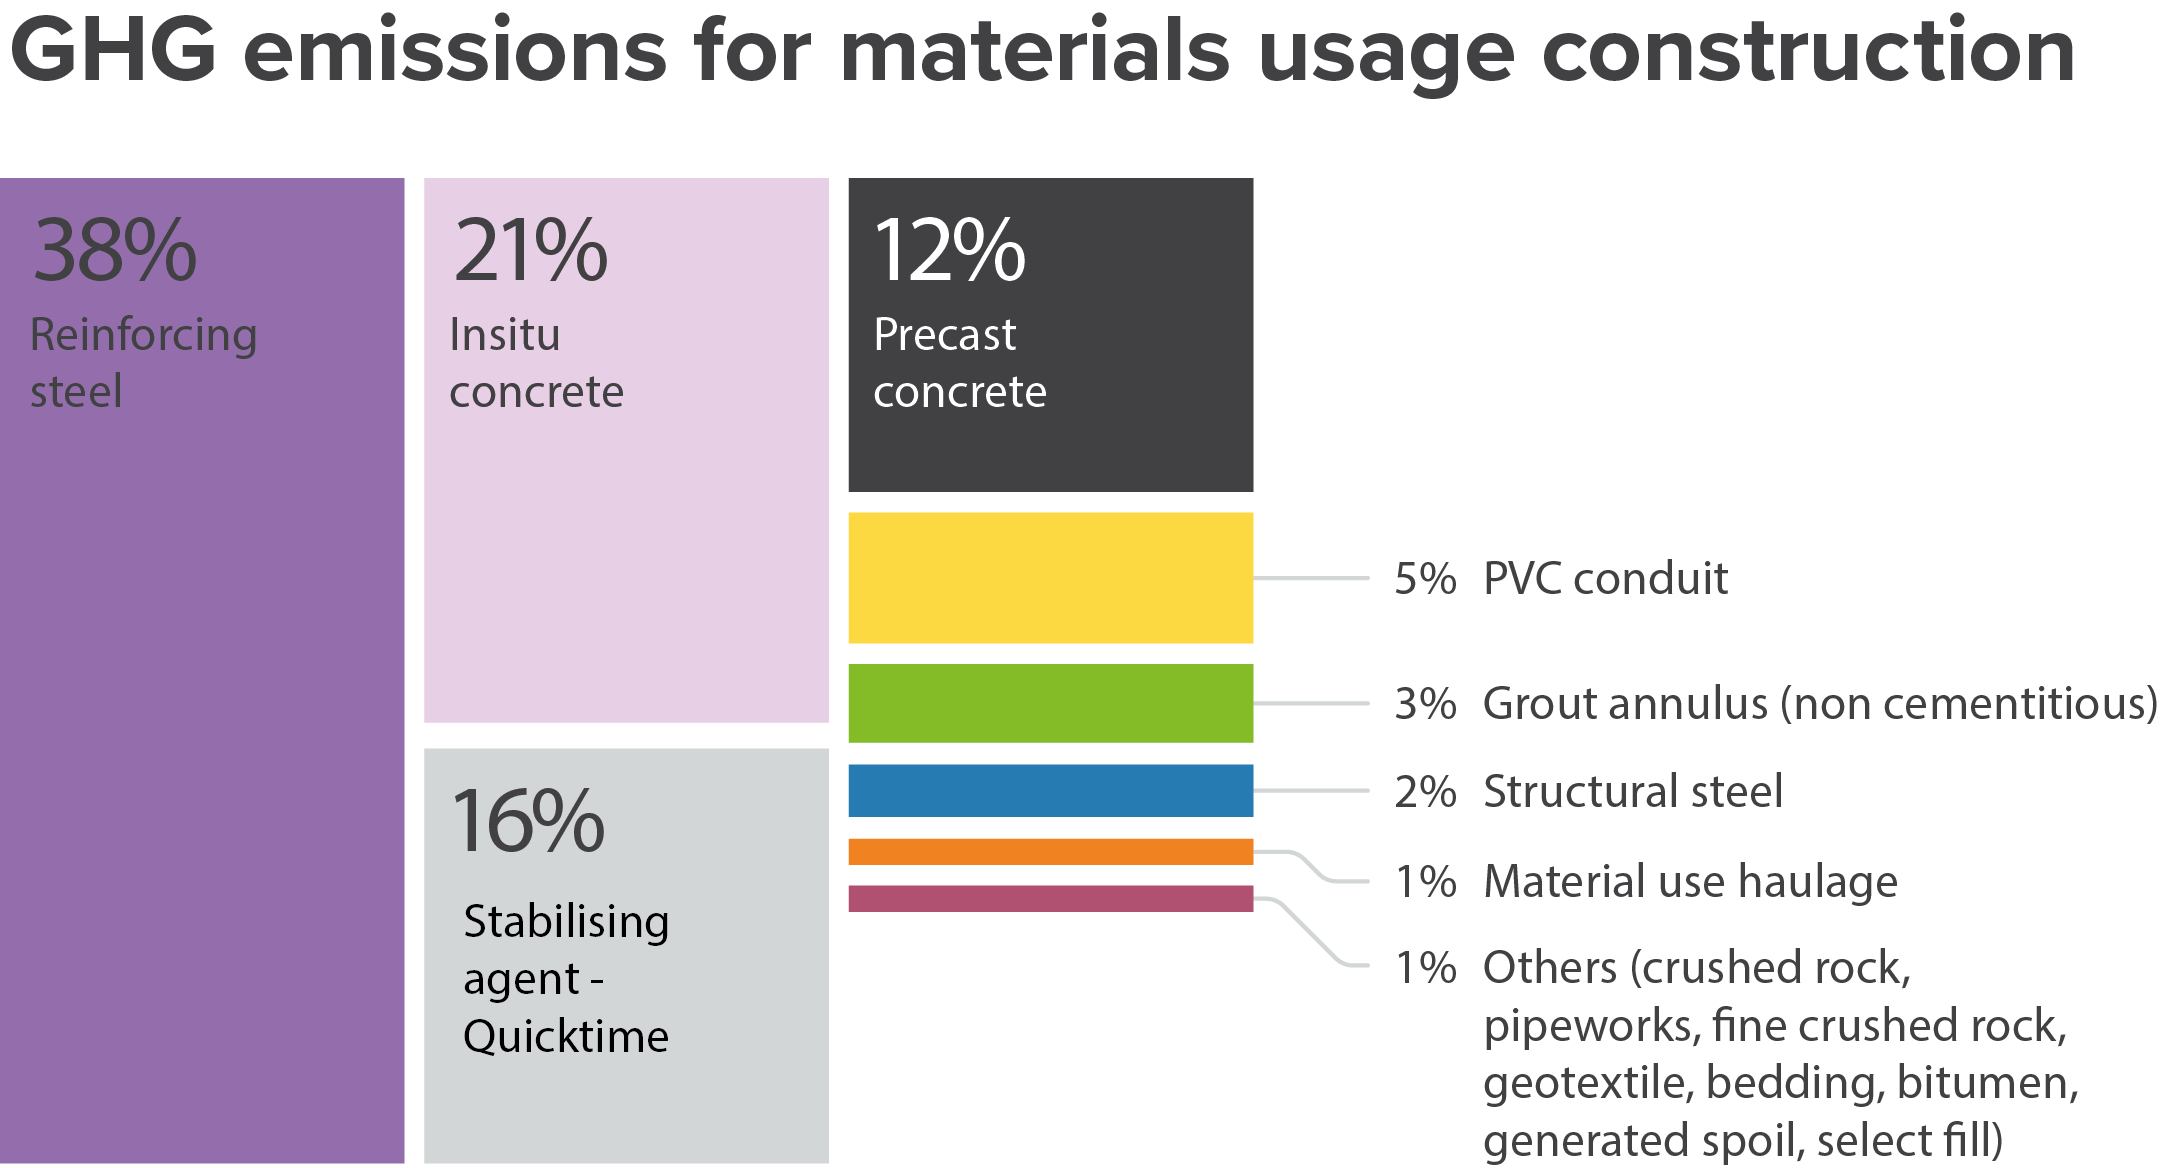 GHG emissions for materials usage for construction; 38% Reinforcing steel, 21% Insitu concrete, 16% Stabilising agent - Quicktime, 12% Precast concrete, 5% PVC conduit, 3% Grout annulus (non cementitious), 2% Structural steel, 1% Material use haulage, 1% Others (crushed rock, pipeworks, fine crushged, rock, geotextile, bedding, bitumen, generated spoil, select fill)